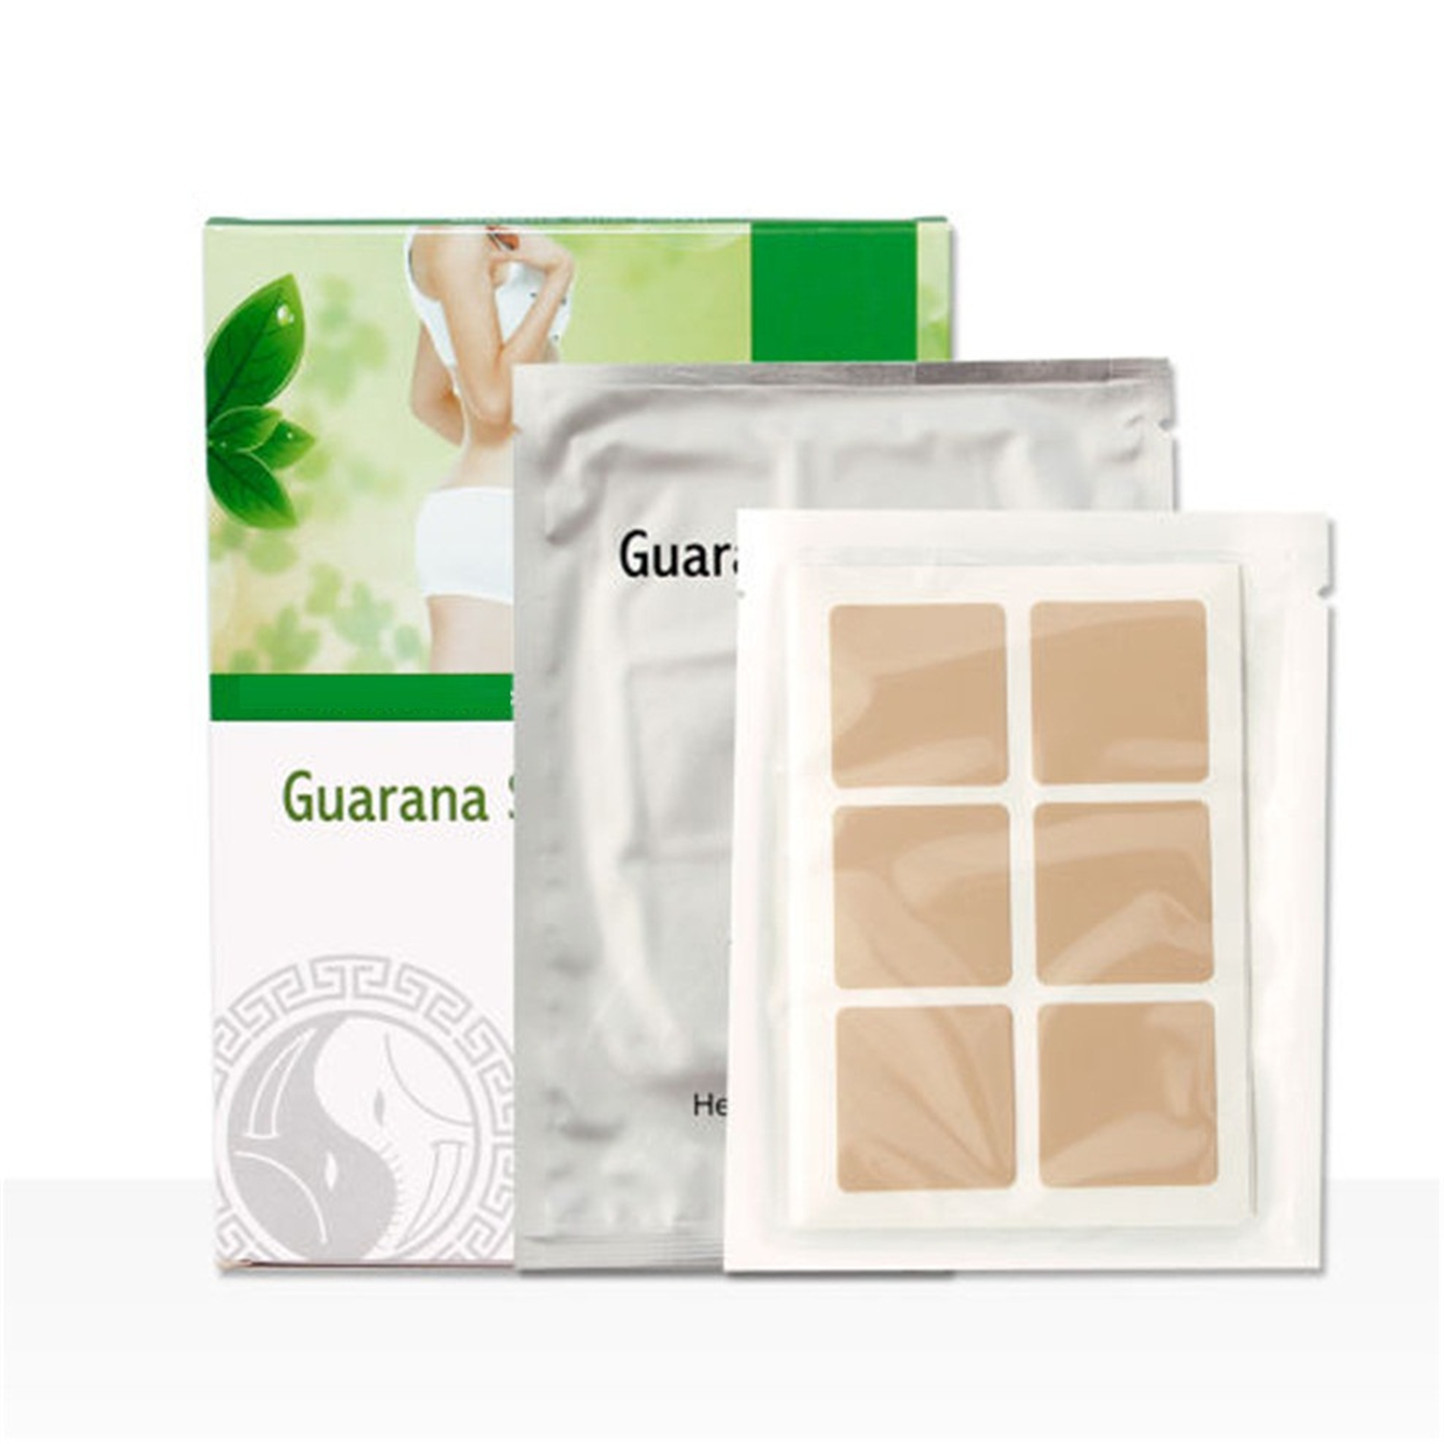 China Healthy and Safe Herbal Guarana Extract original slimming detox wonder patches wholesale